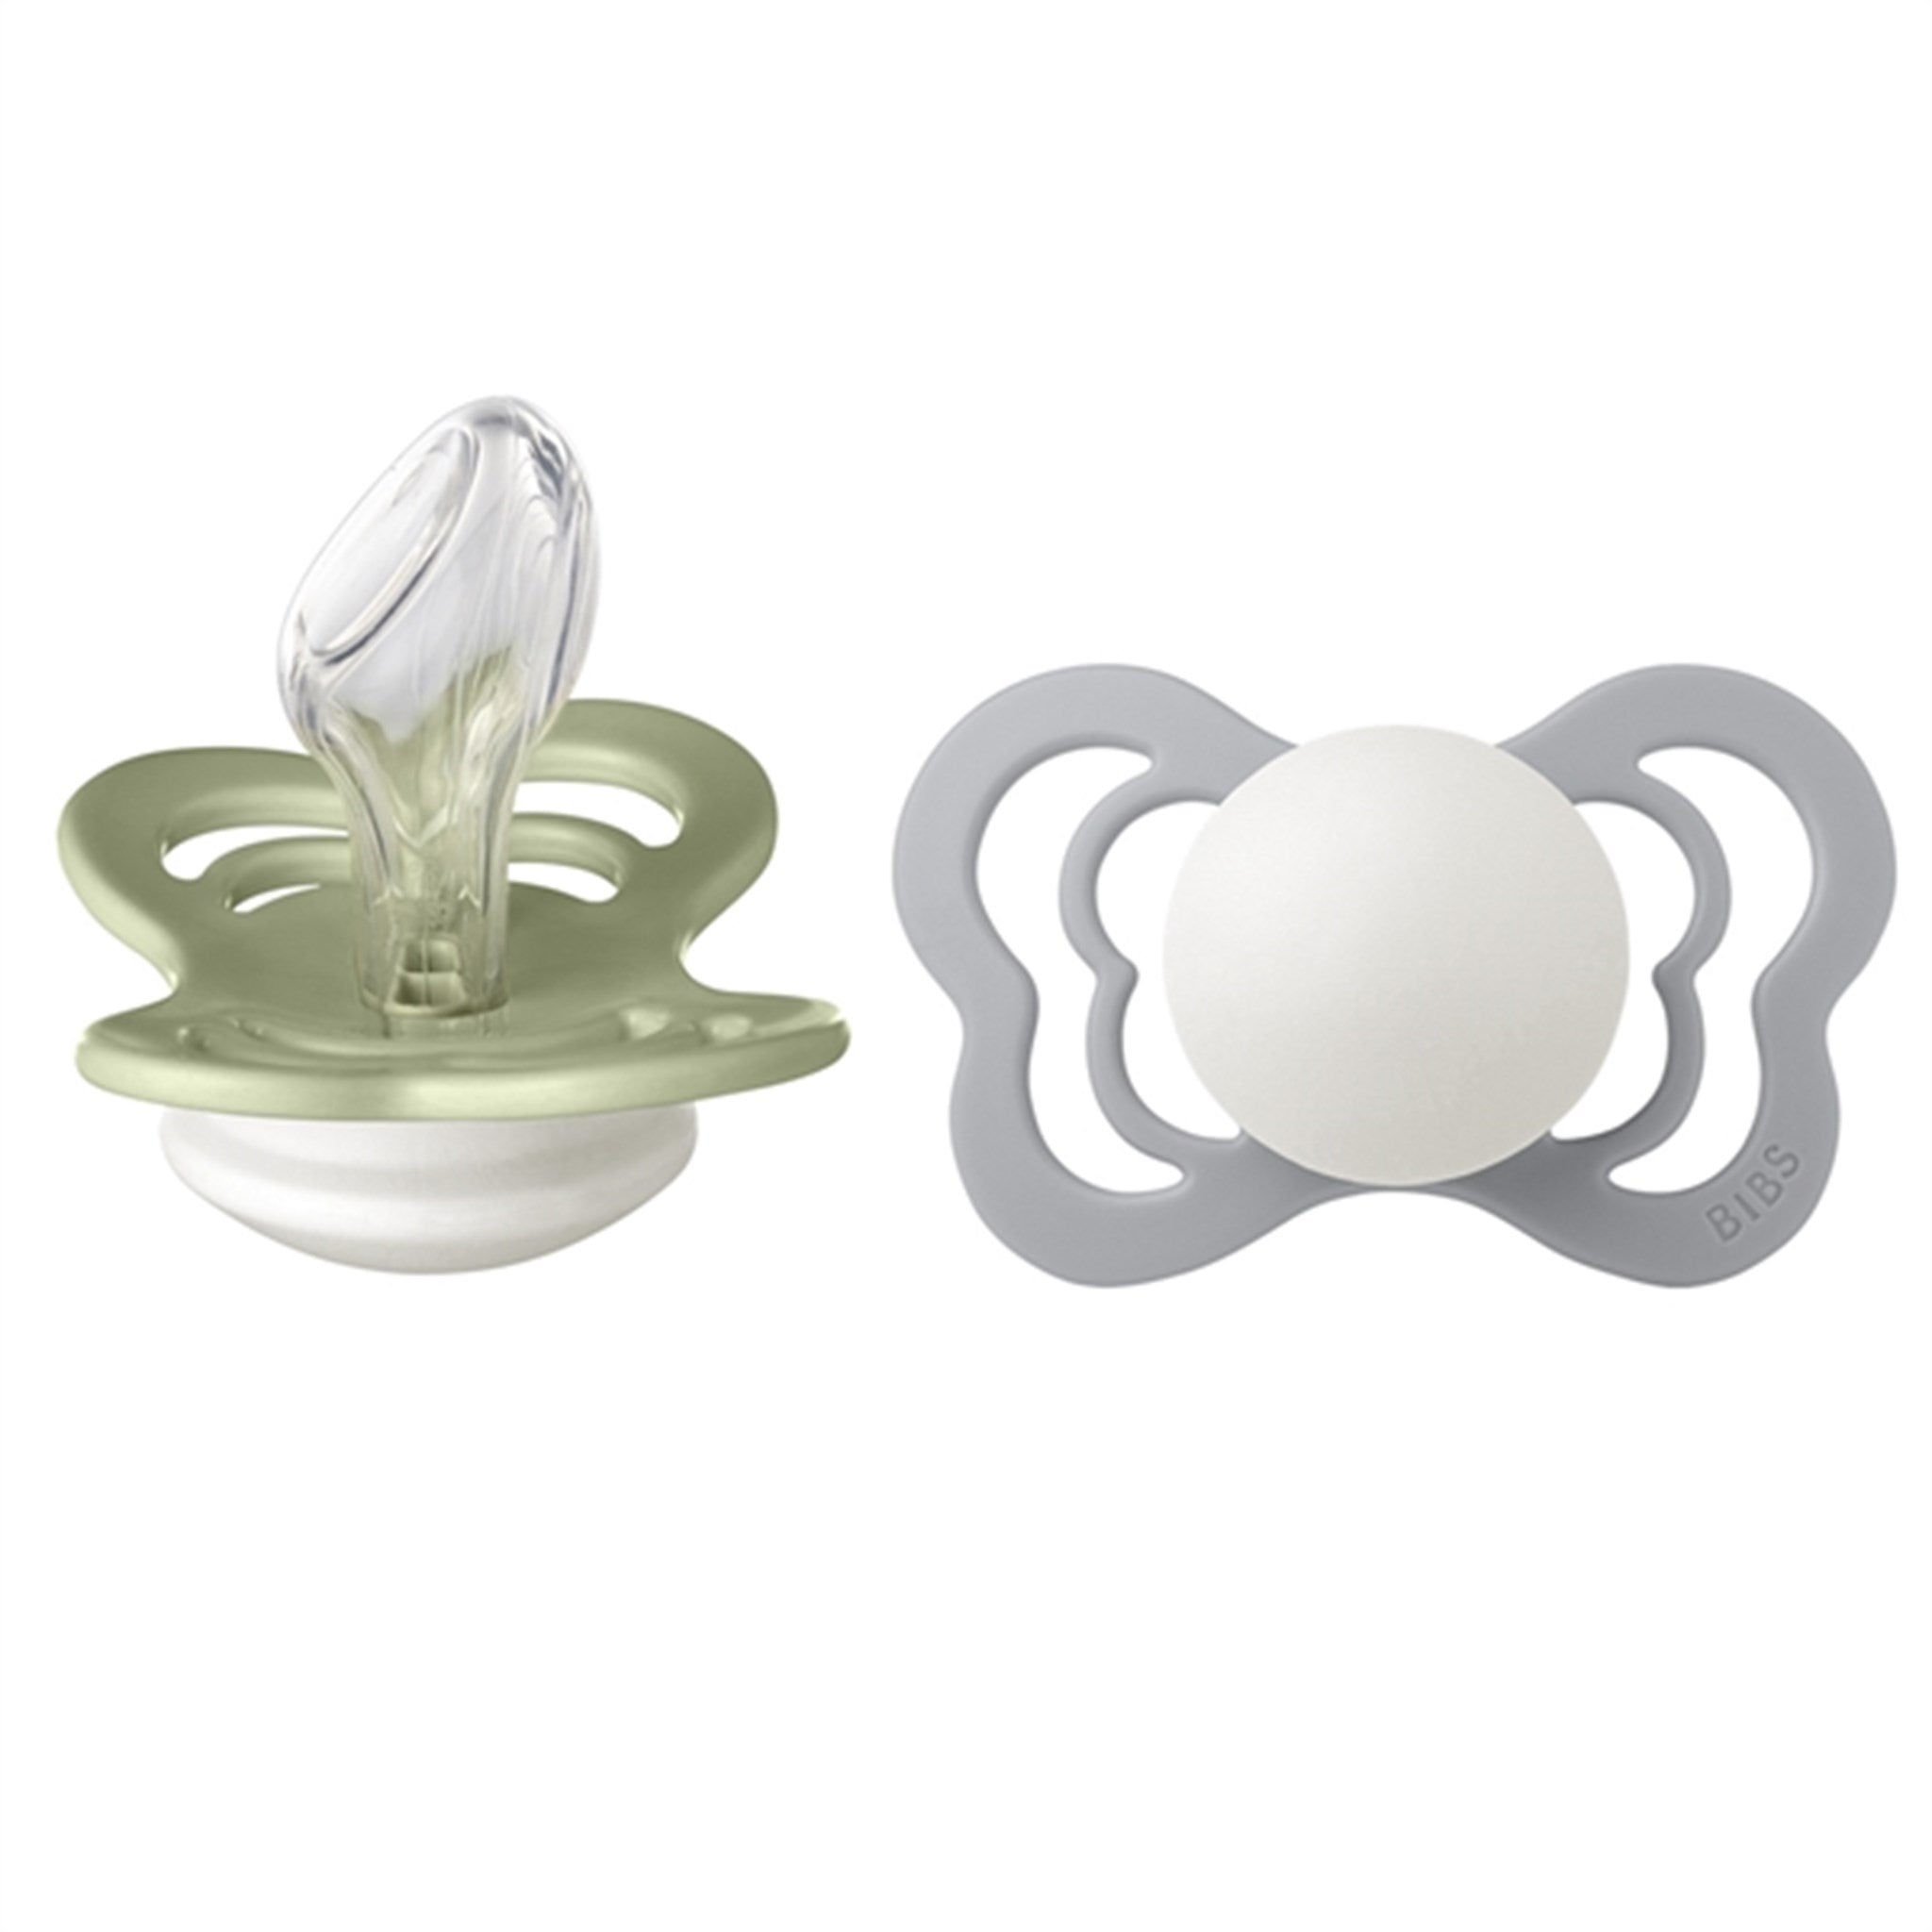 Bibs Couture Silicone Pacifiers Glow 2-pack Anatomical Sage/Cloud